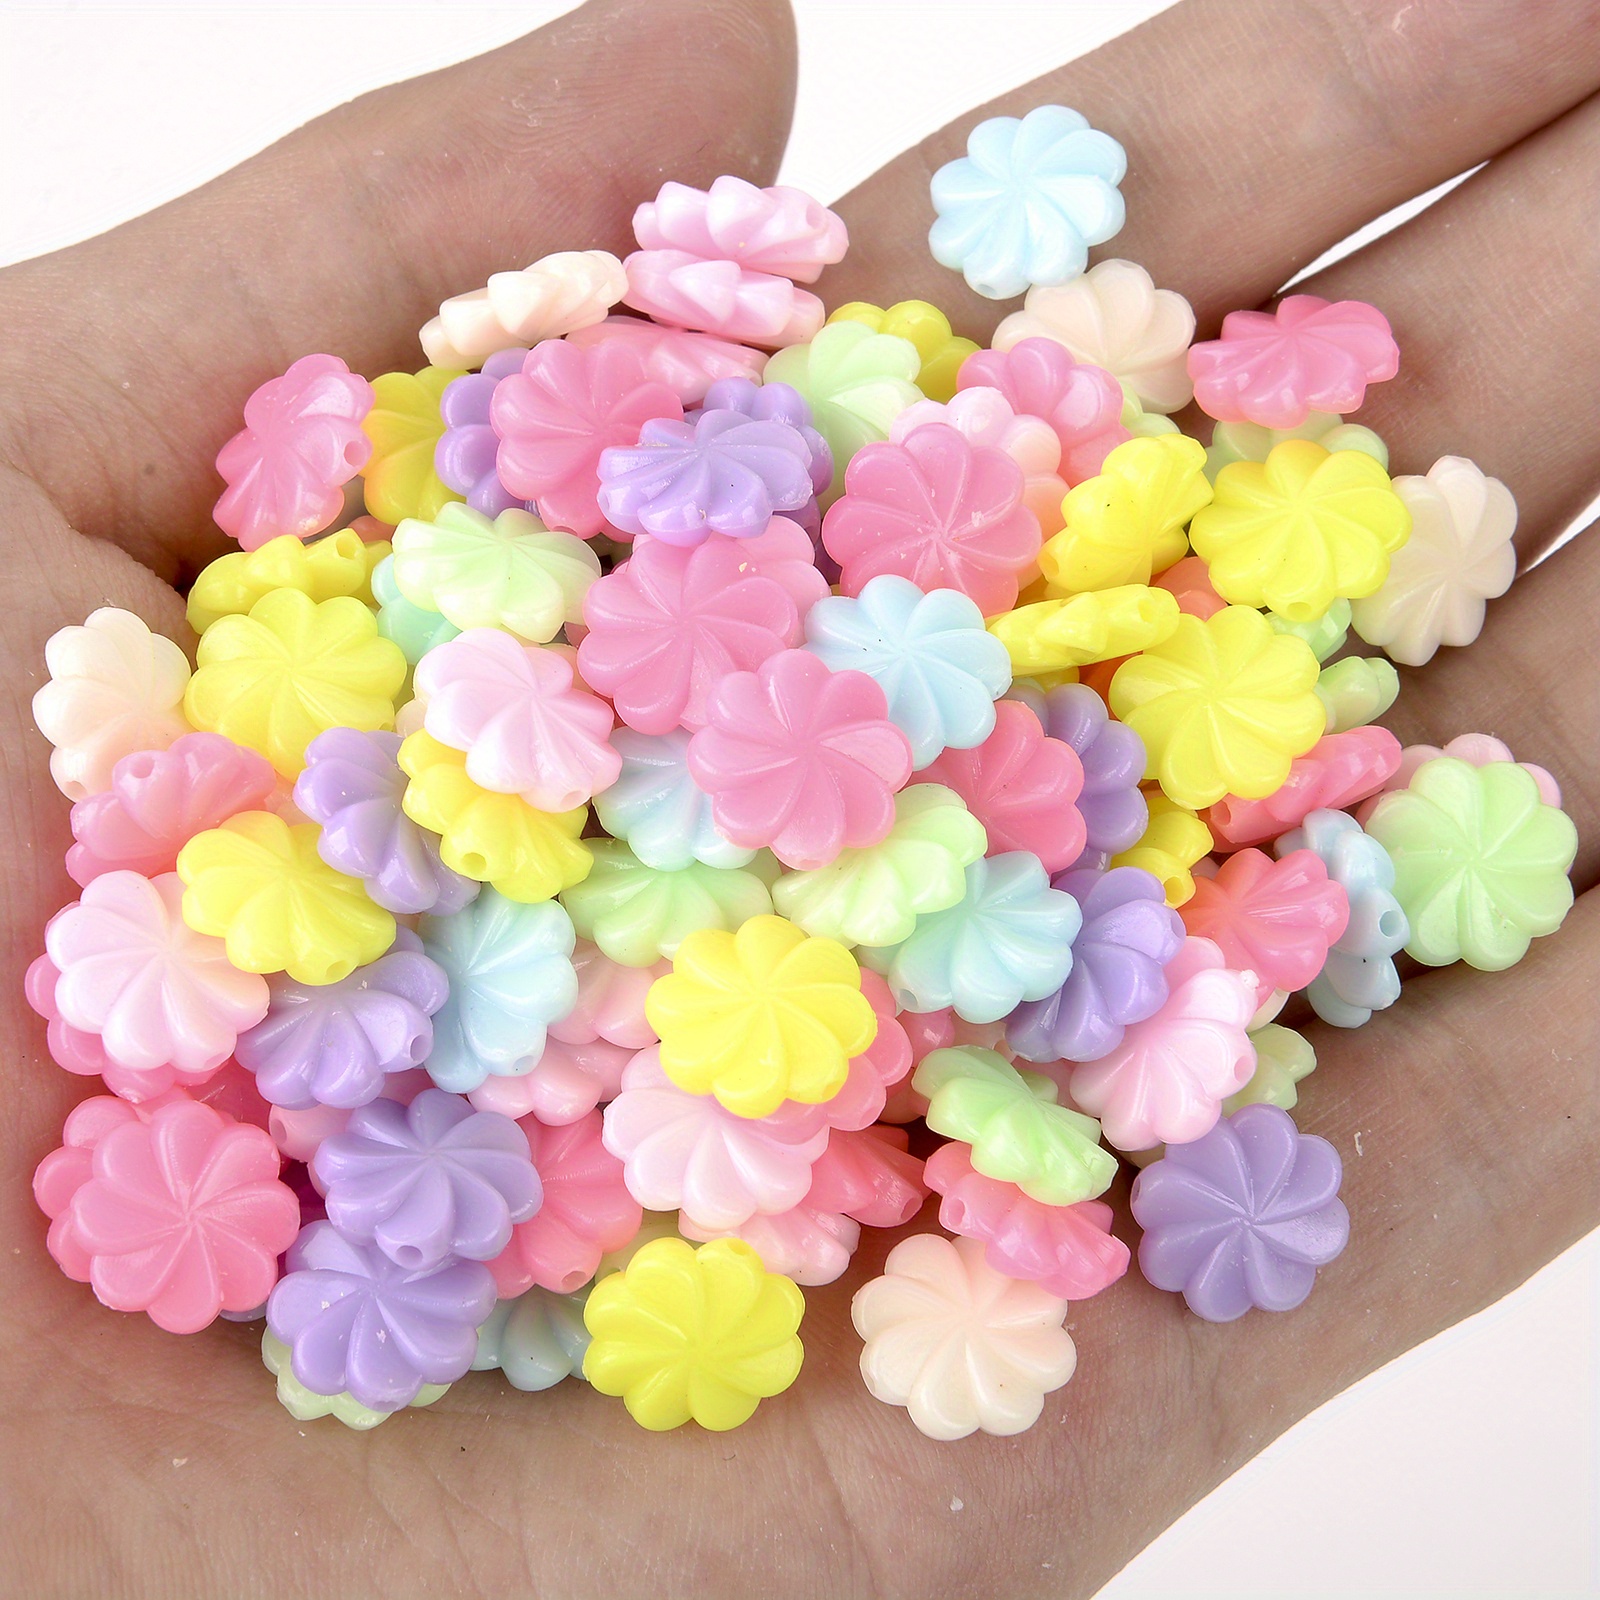 Rose Beads / Acrylic Flower Bead (14mm / Assorted Candy Color Mix / 15, MiniatureSweet, Kawaii Resin Crafts, Decoden Cabochons Supplies